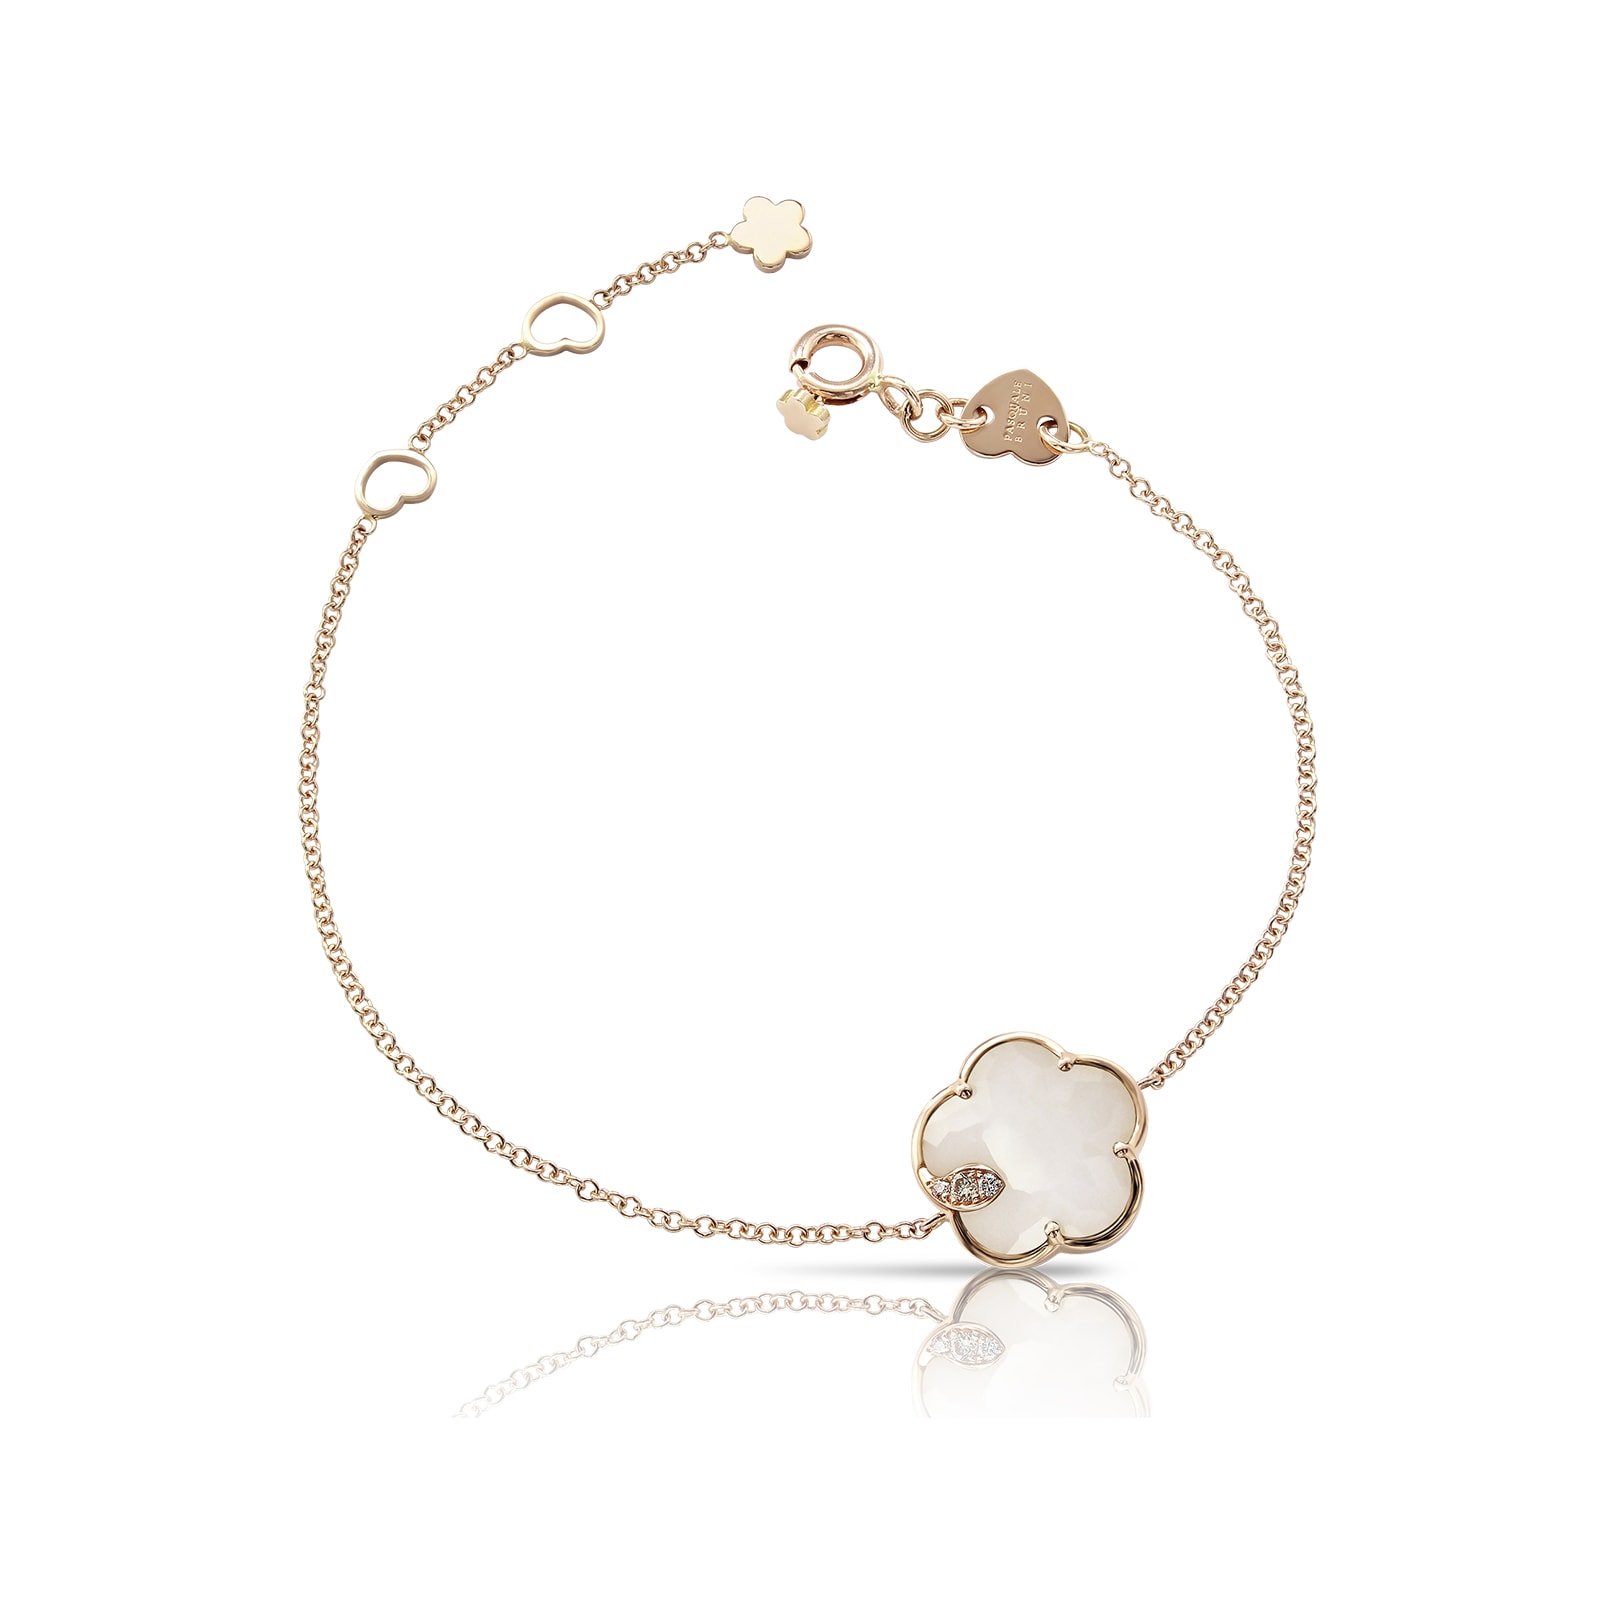 Petit Joli Bracelet in 18ct Rose Gold with White Agate and Diamonds